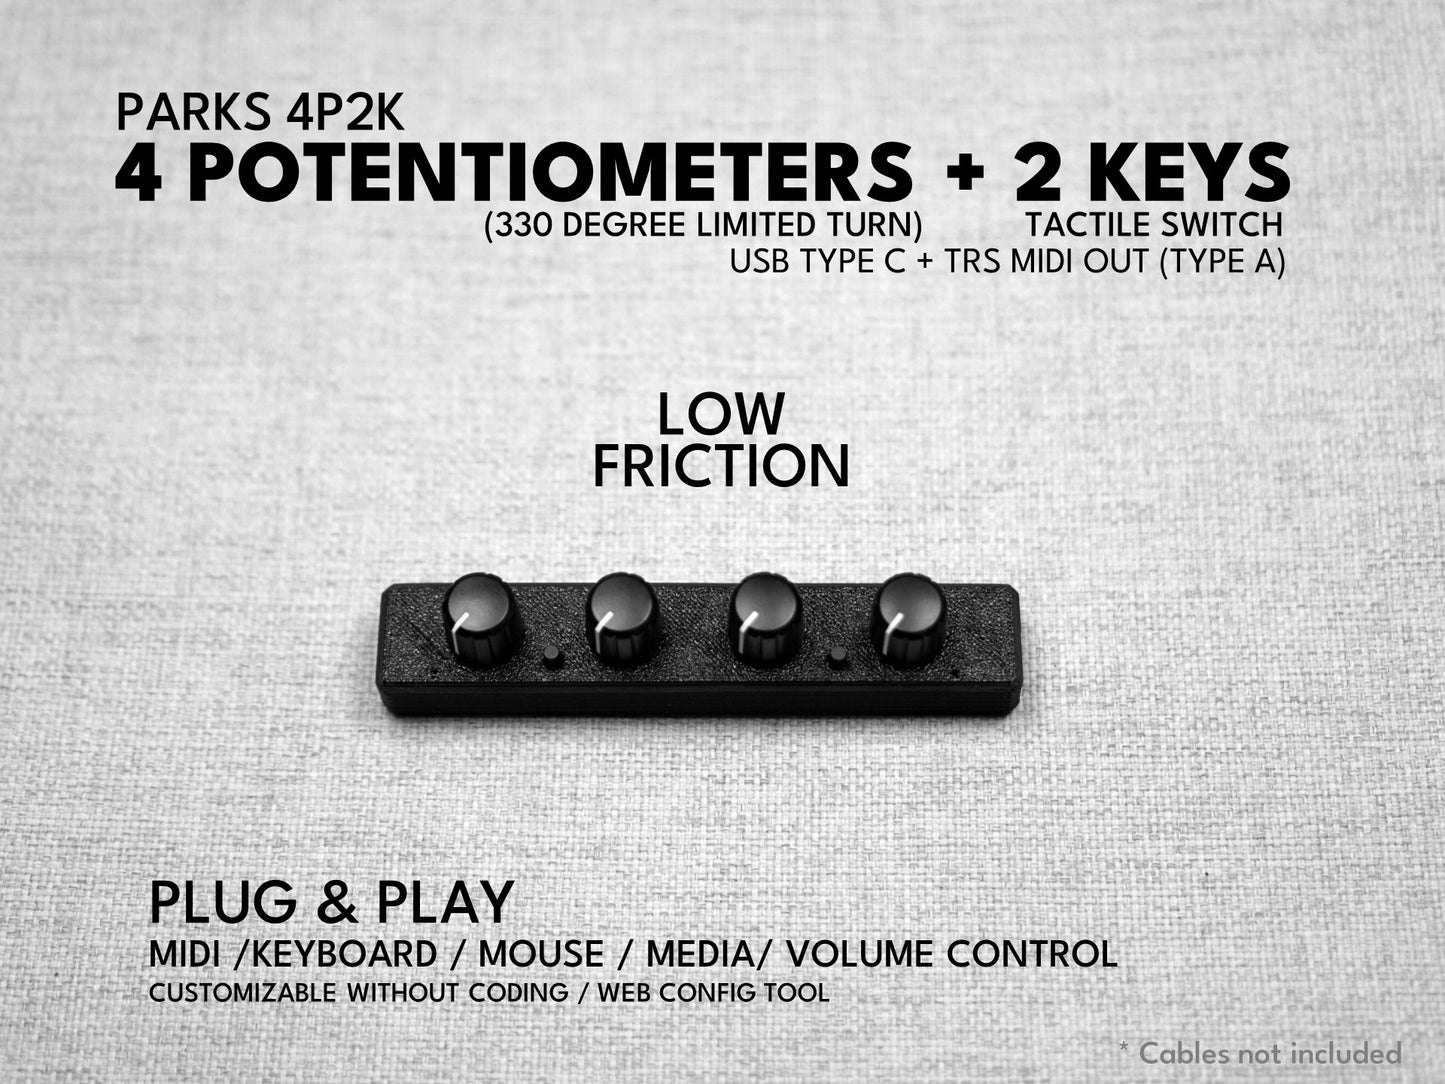 Park's 4P2k (4 Potentiometers + 2 Keys) / Midi controller dial / knob / USB / customizable channel CC / plug and play / Sound Devices